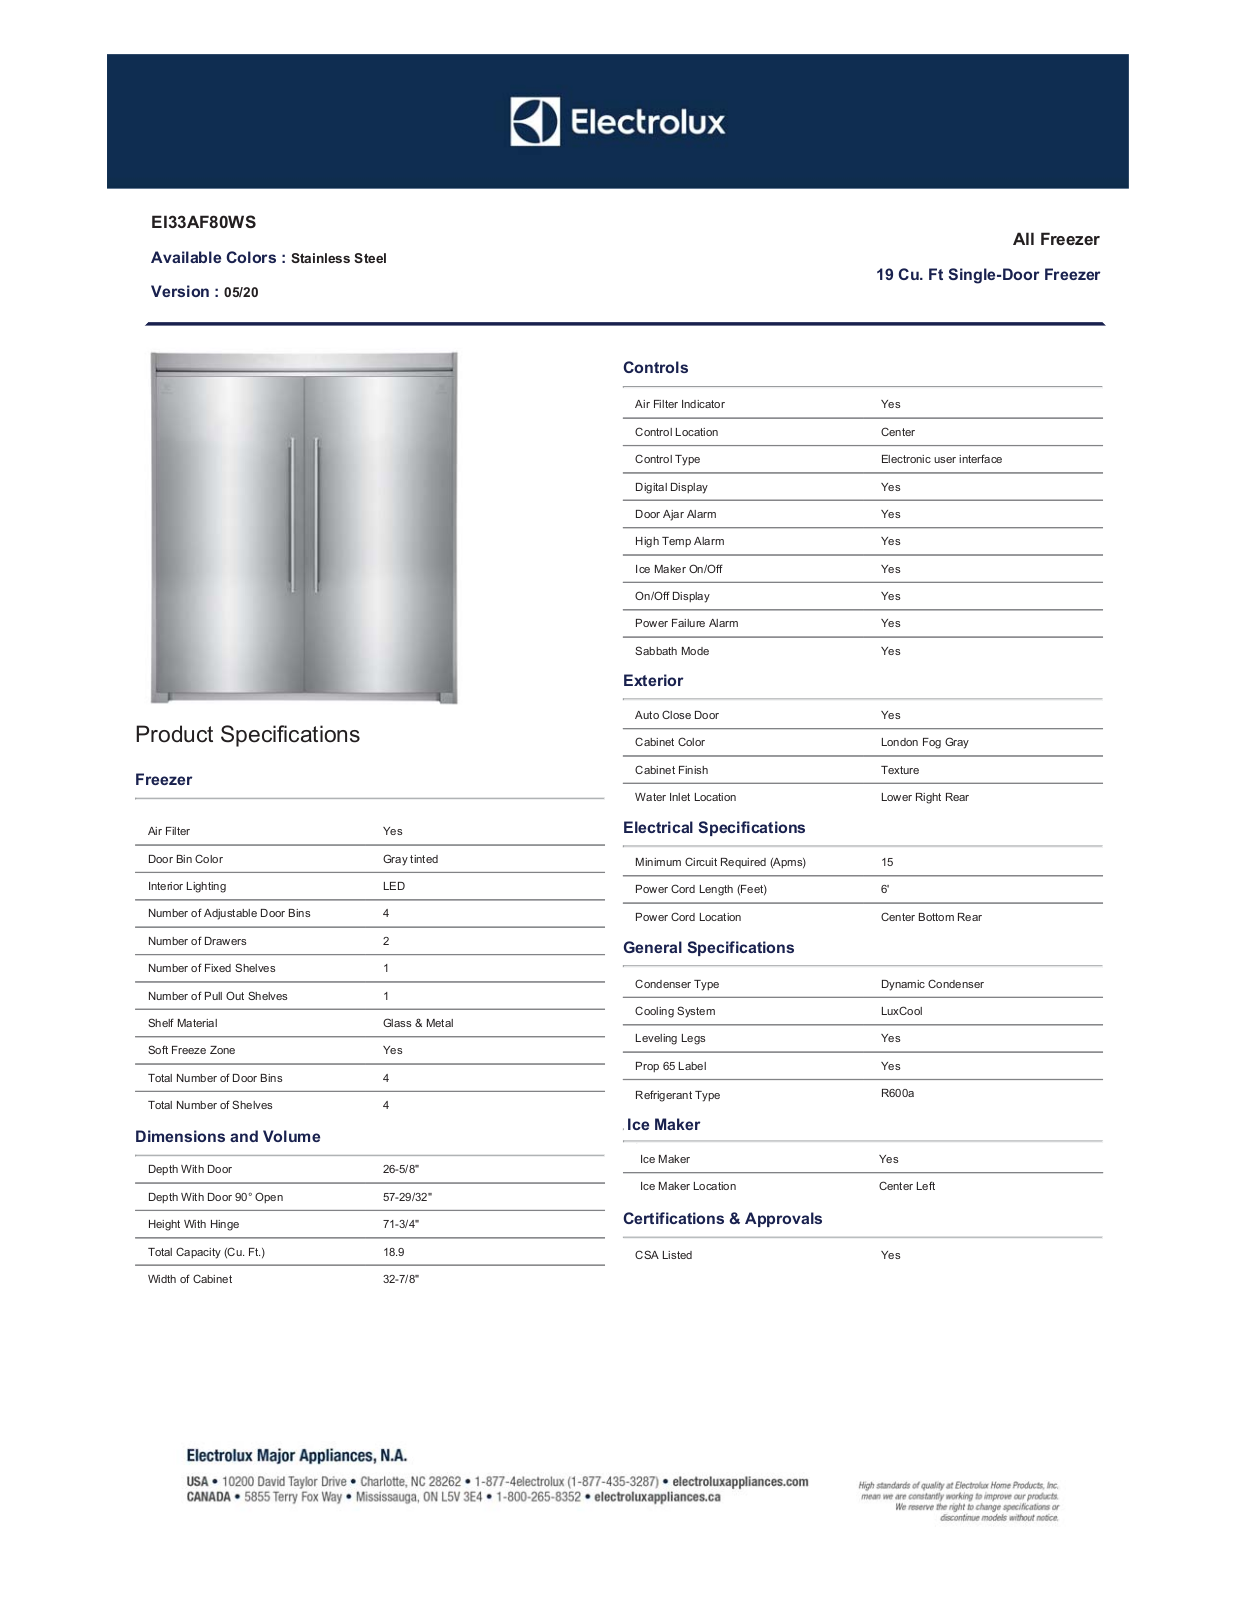 Electrolux EI33AF80WS Specifications